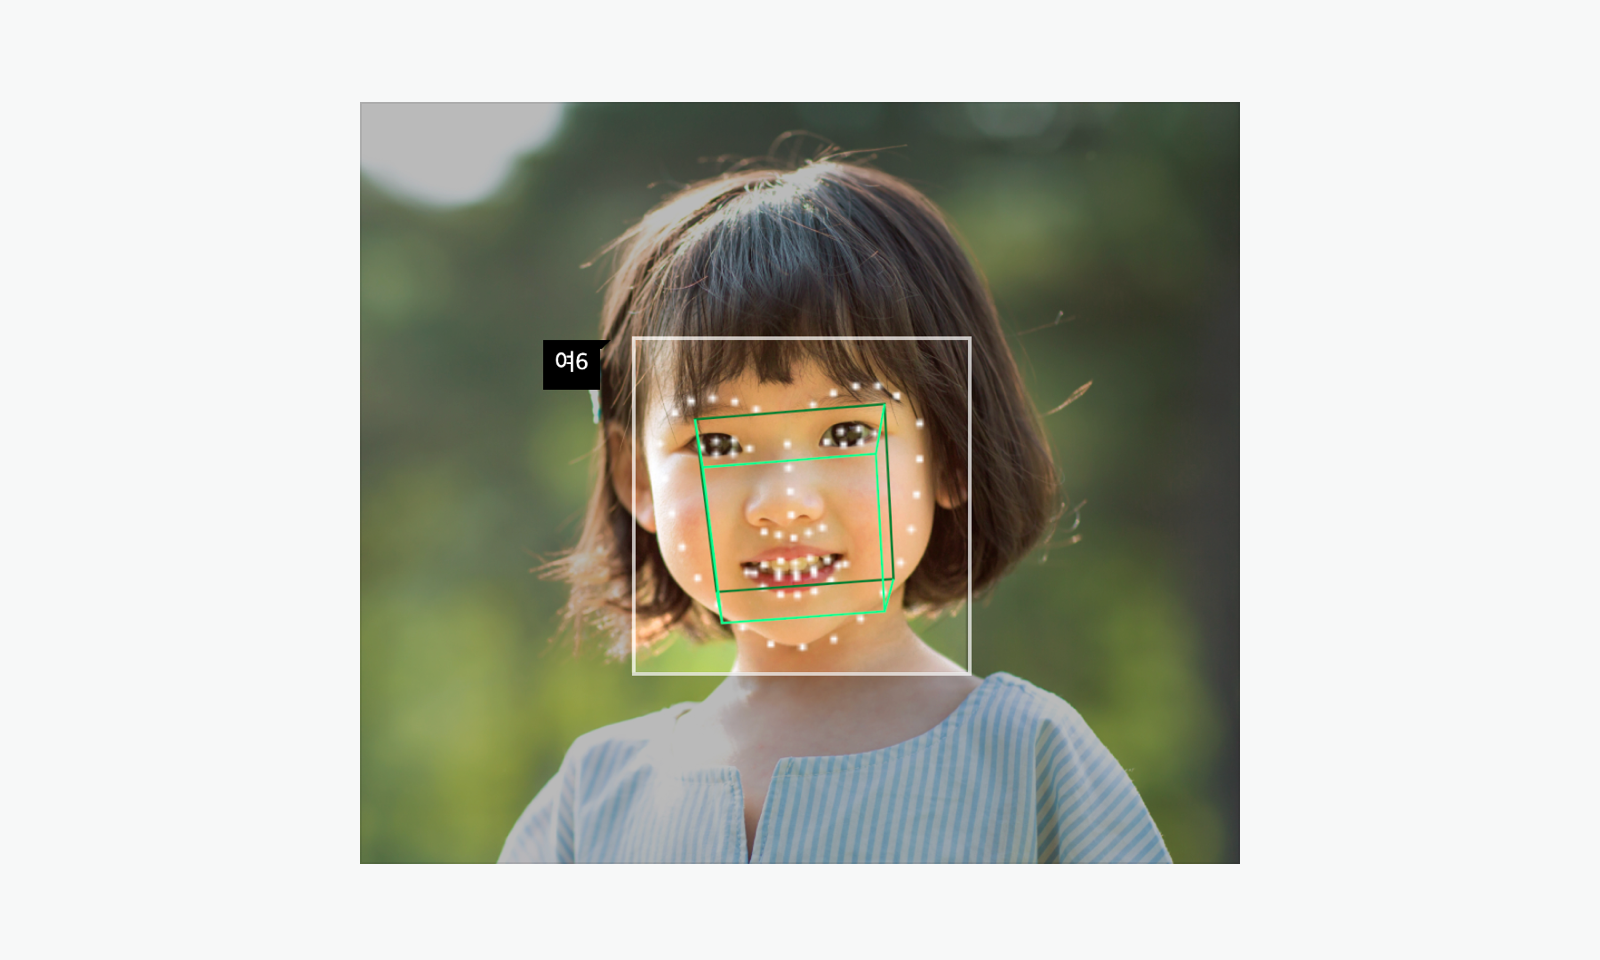 Image that Face detection API is applied to